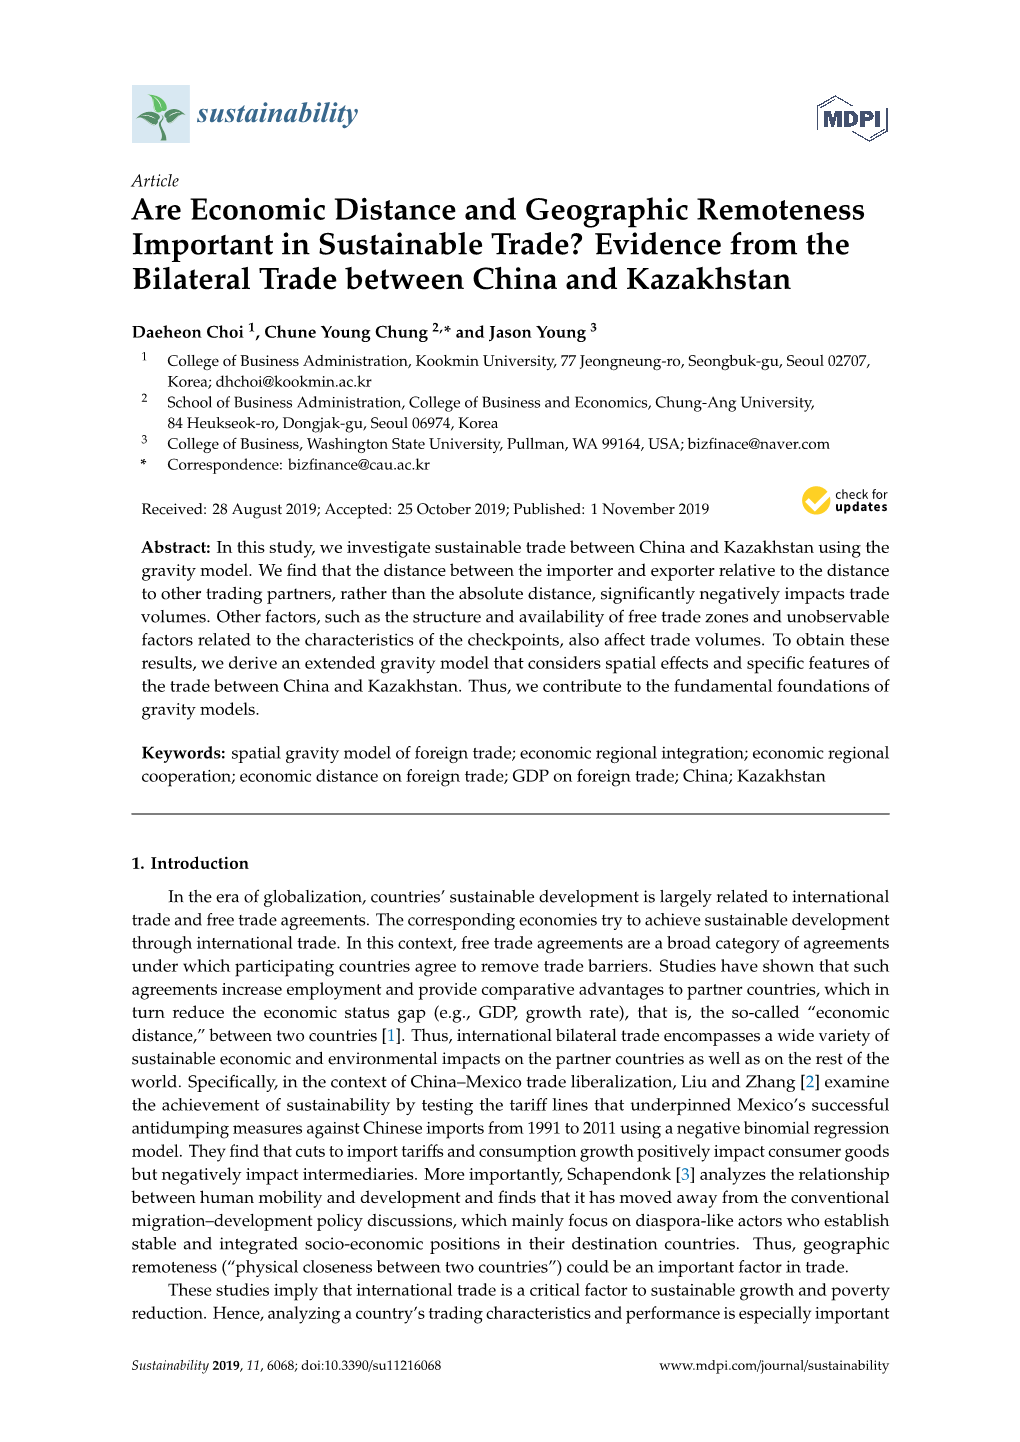 Are Economic Distance and Geographic Remoteness Important in Sustainable Trade? Evidence from the Bilateral Trade Between China and Kazakhstan